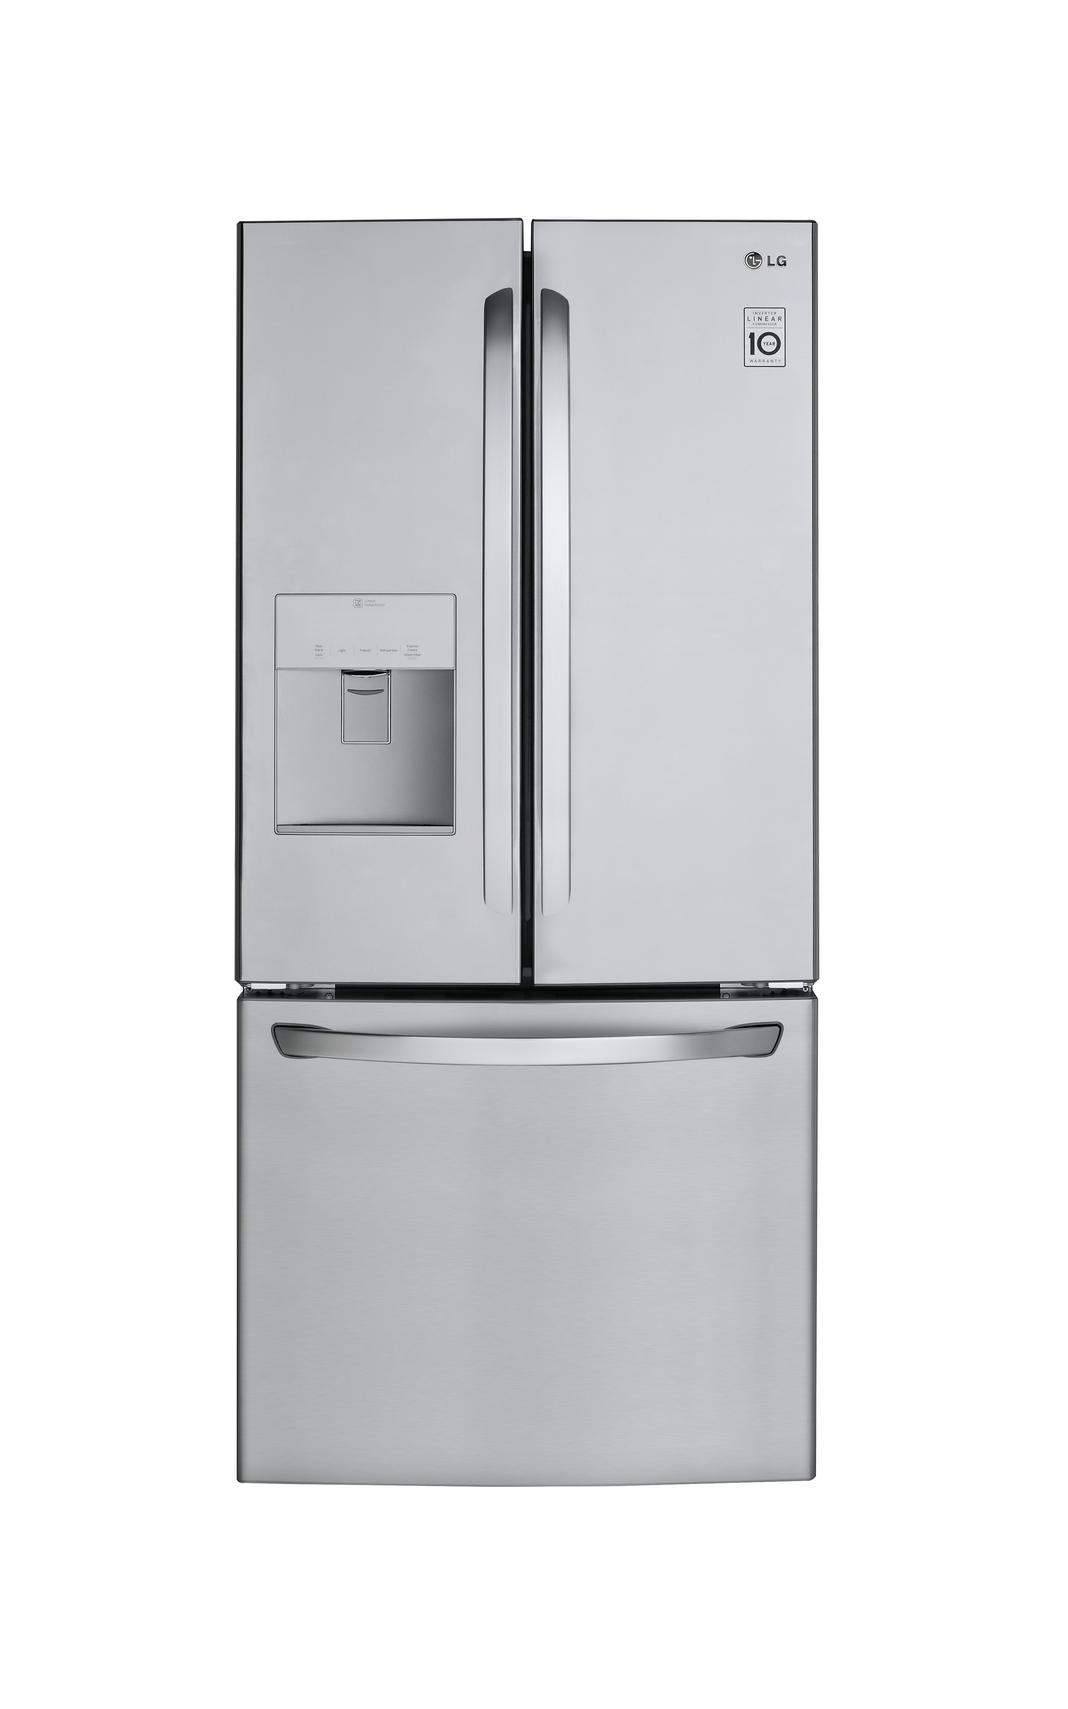 LG - 29.8 Inch 21.8 cu. ft French Door Refrigerator in Stainless - LRFWS2200S